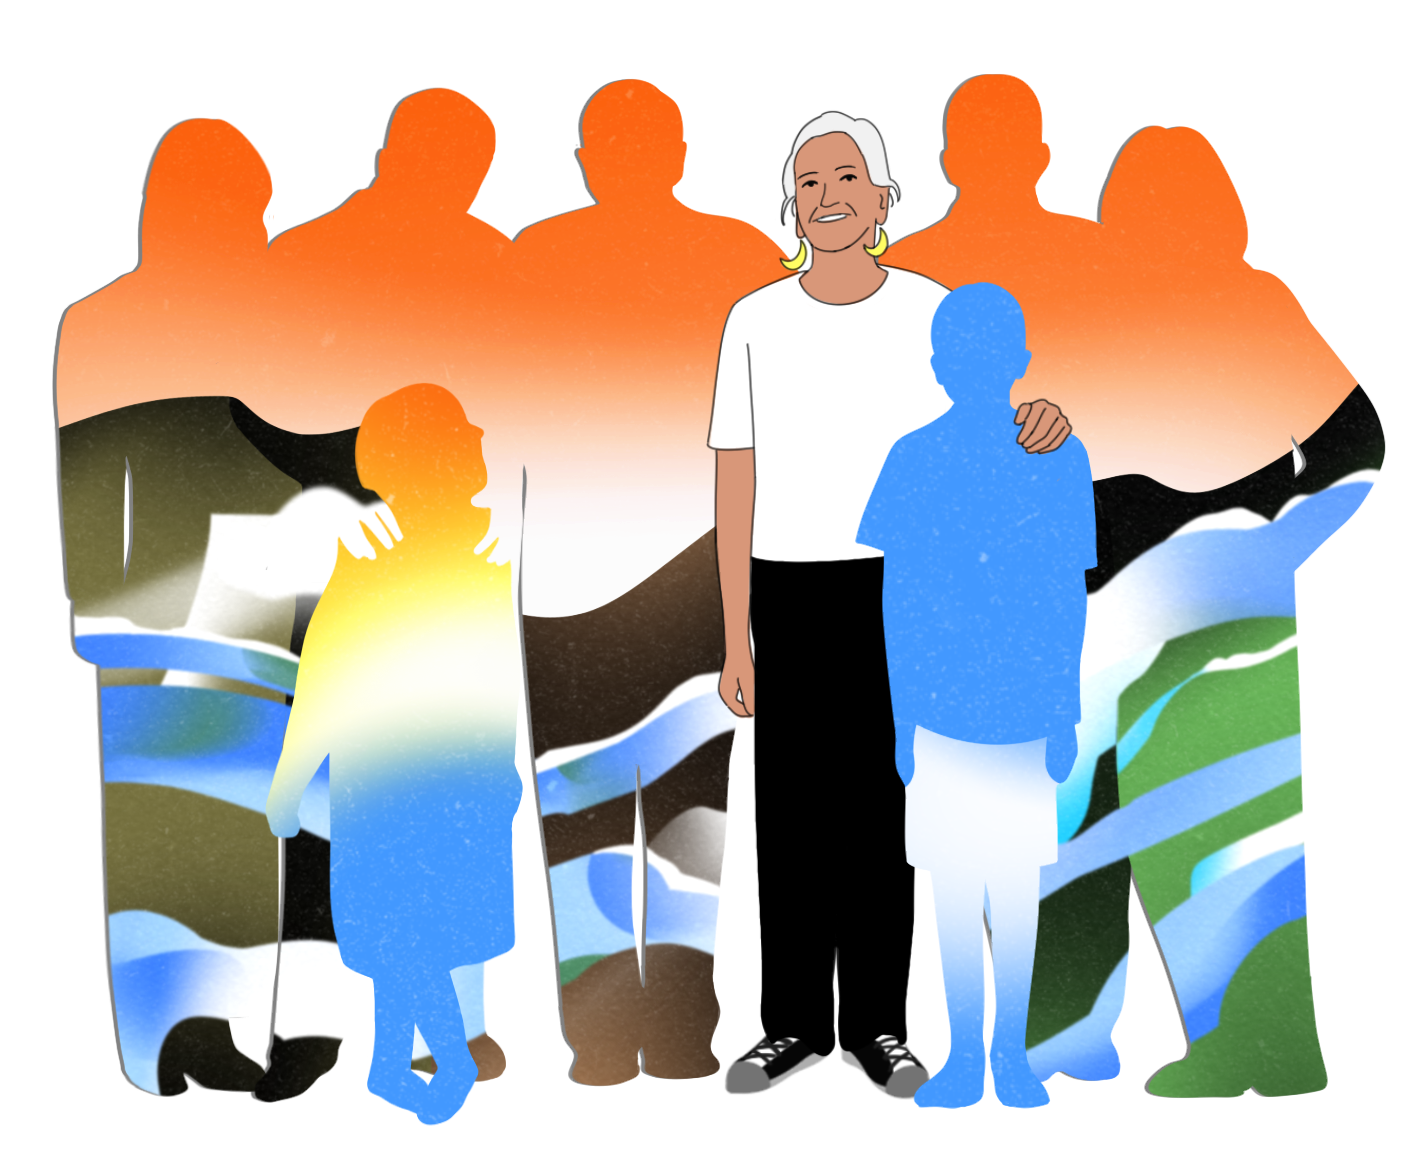 The illustration depicts a woman in a family photo. She is surrounded by silhouettes that represent her family, ancestors, and nature from home.